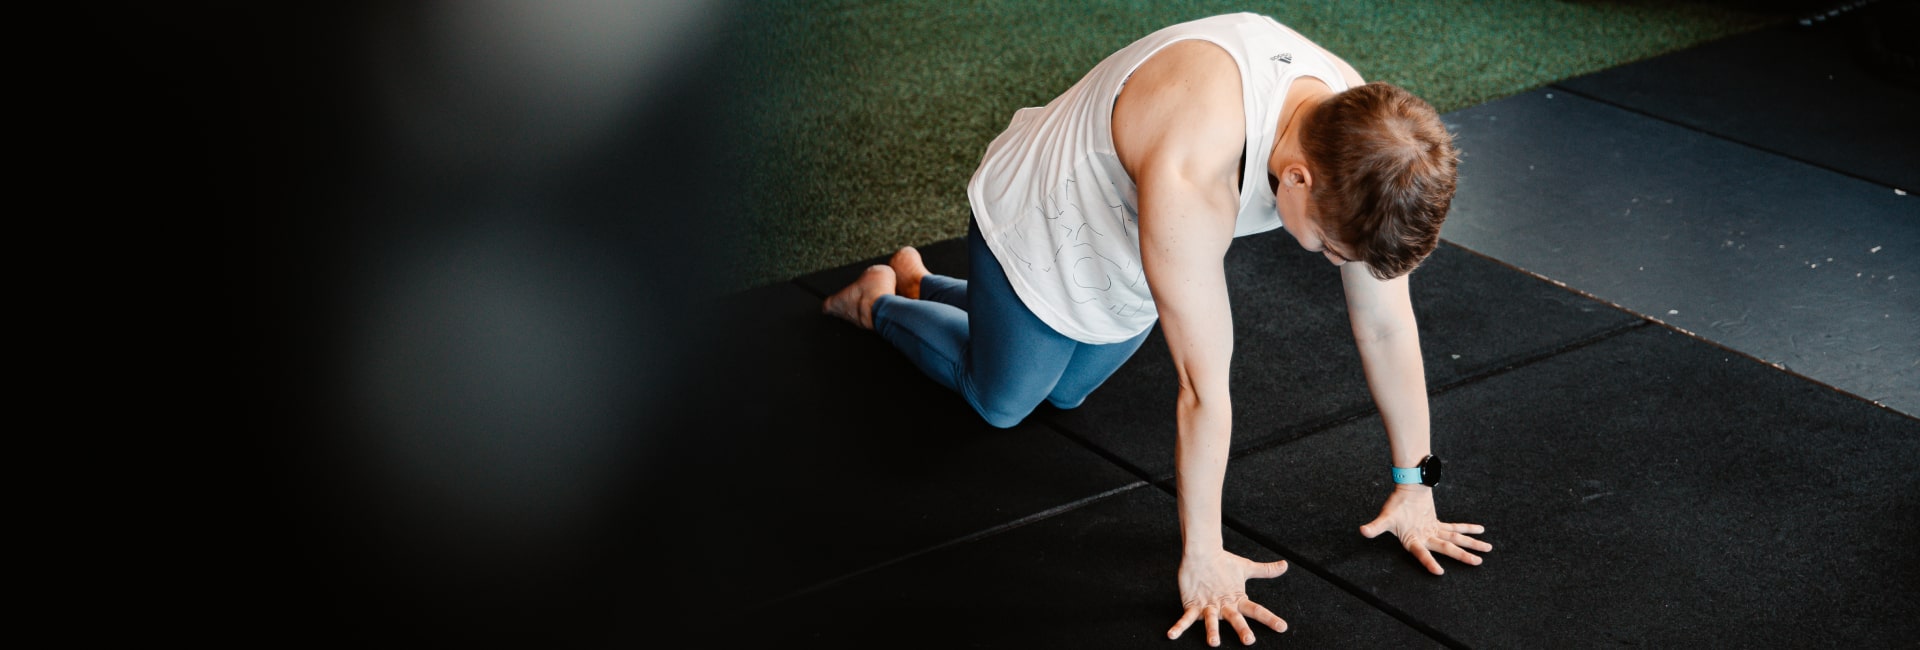 Gentle Mobility Exercises to Improve Strength and Flexibility